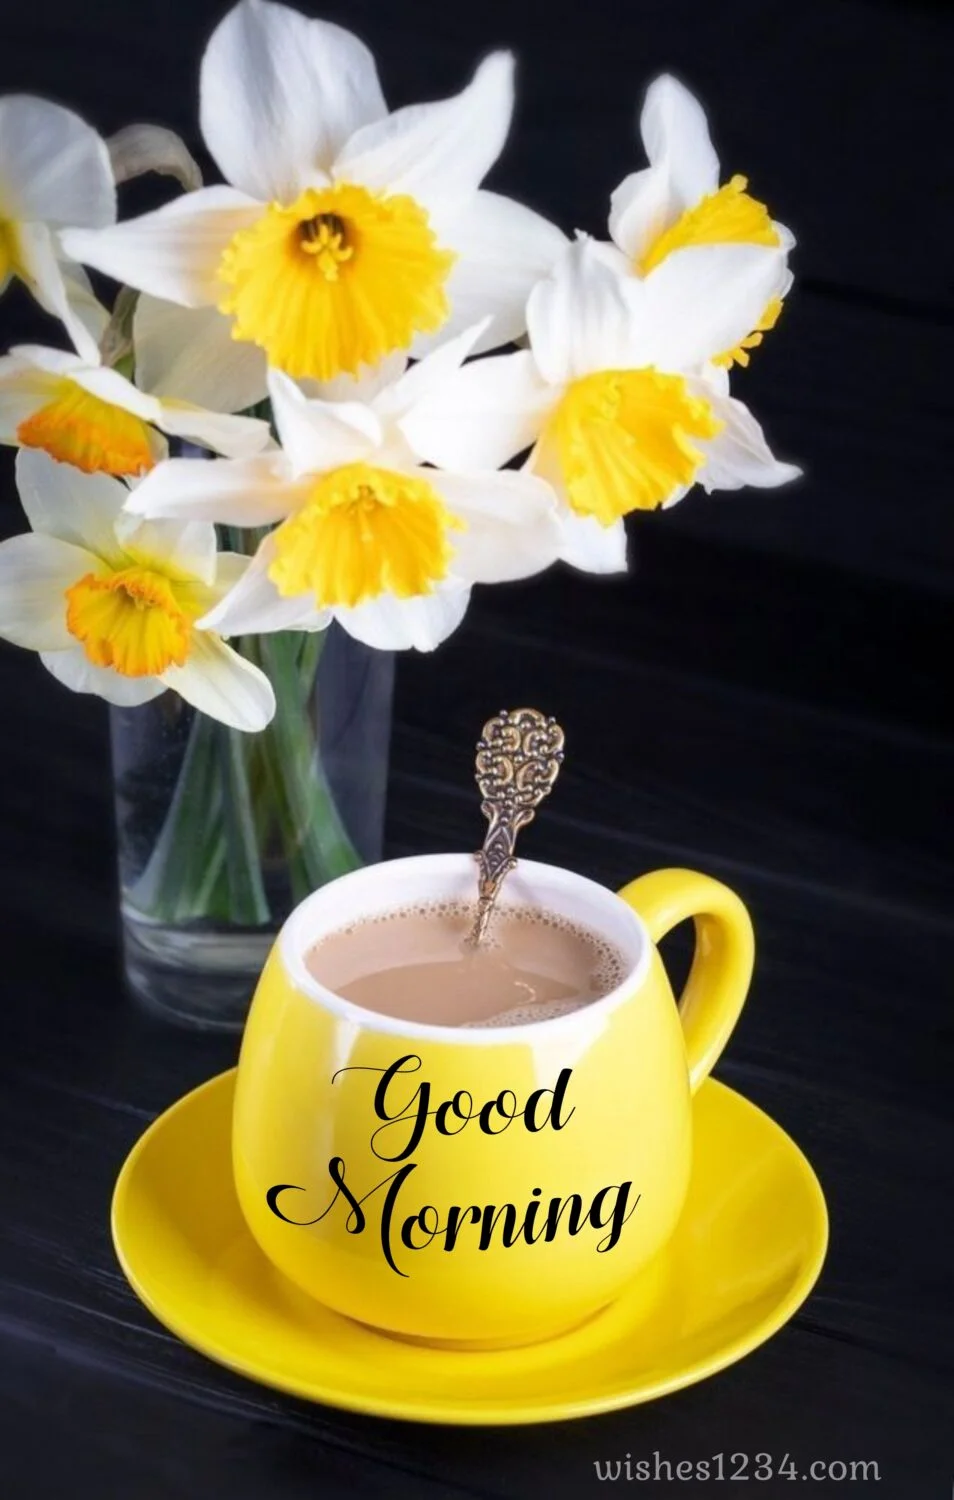 White daffodil with yellow cup of tea, Wednesday Quotes | Wednesday blessings.